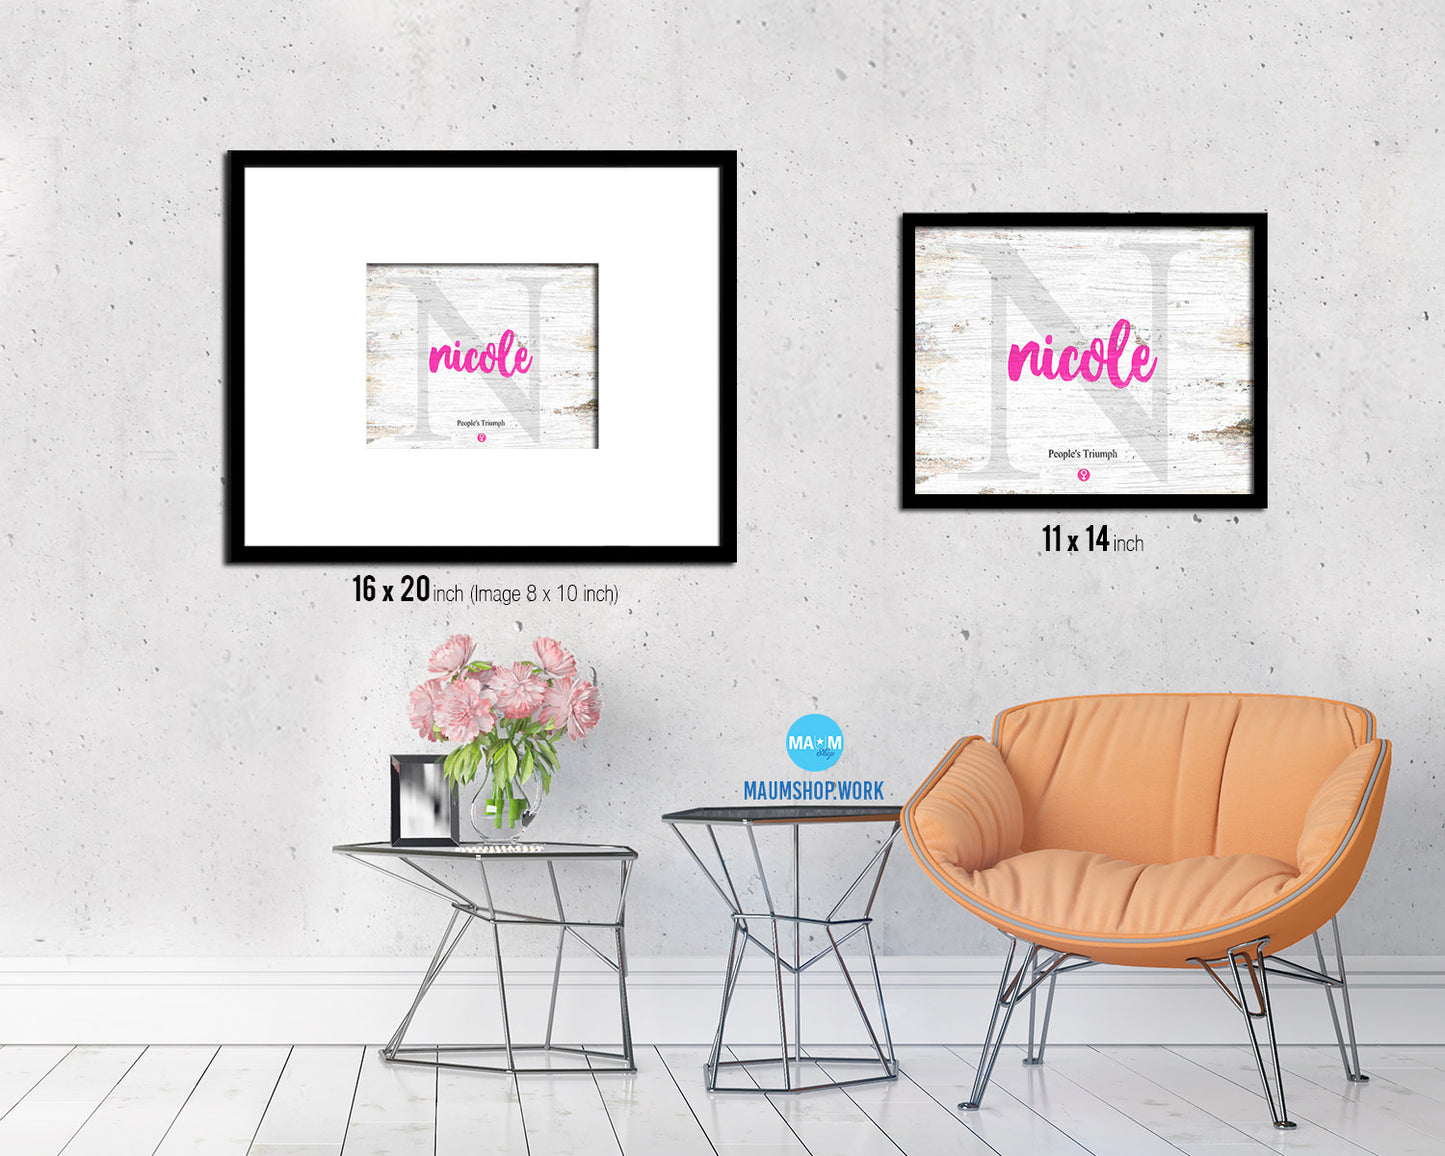 Nicole Personalized Biblical Name Plate Art Framed Print Kids Baby Room Wall Decor Gifts